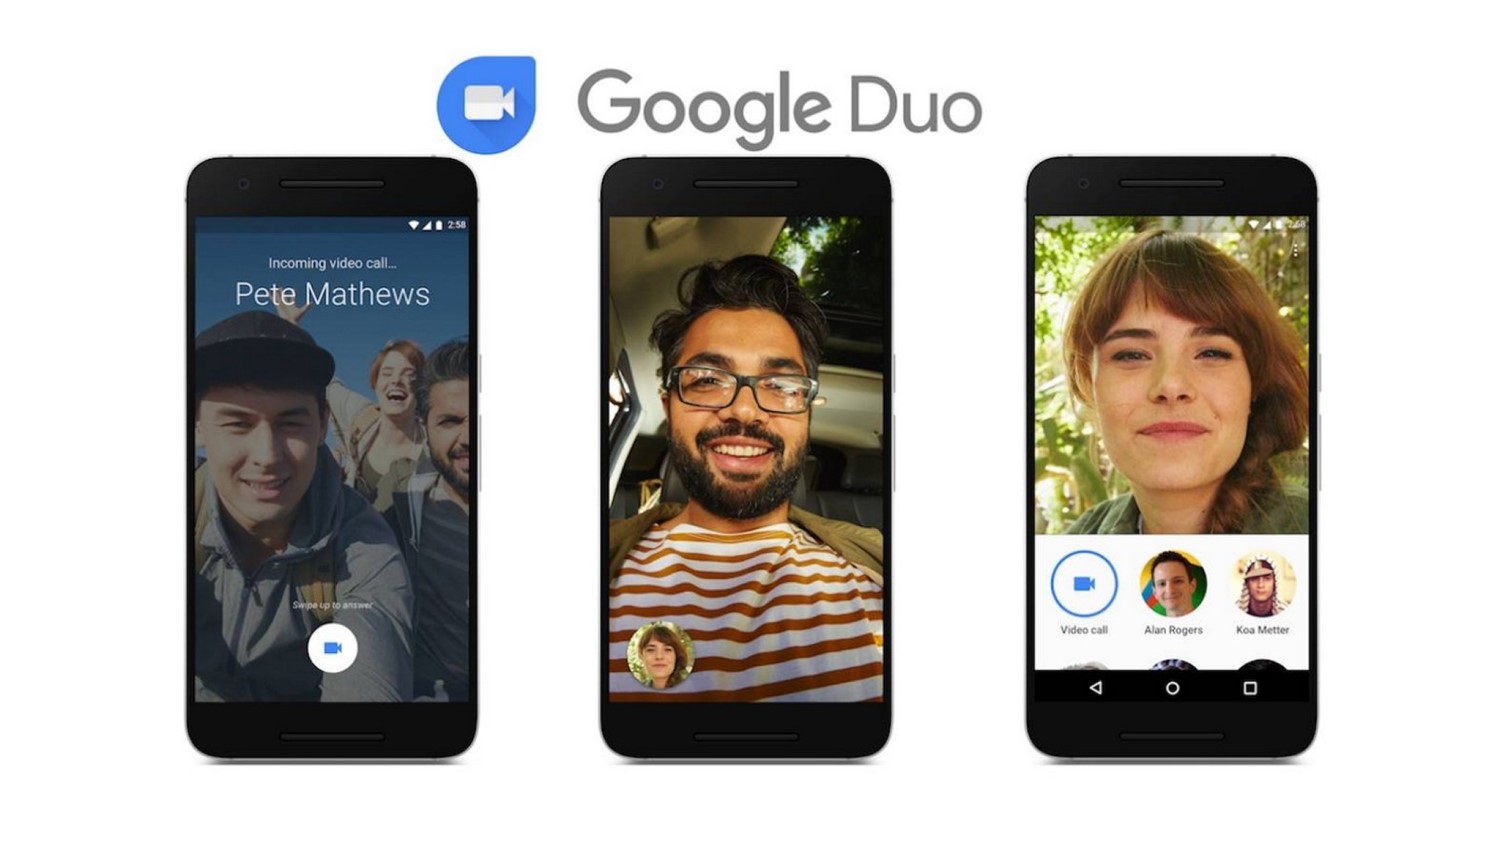 Here's How to Share Your Screen Using Google Duo on Android